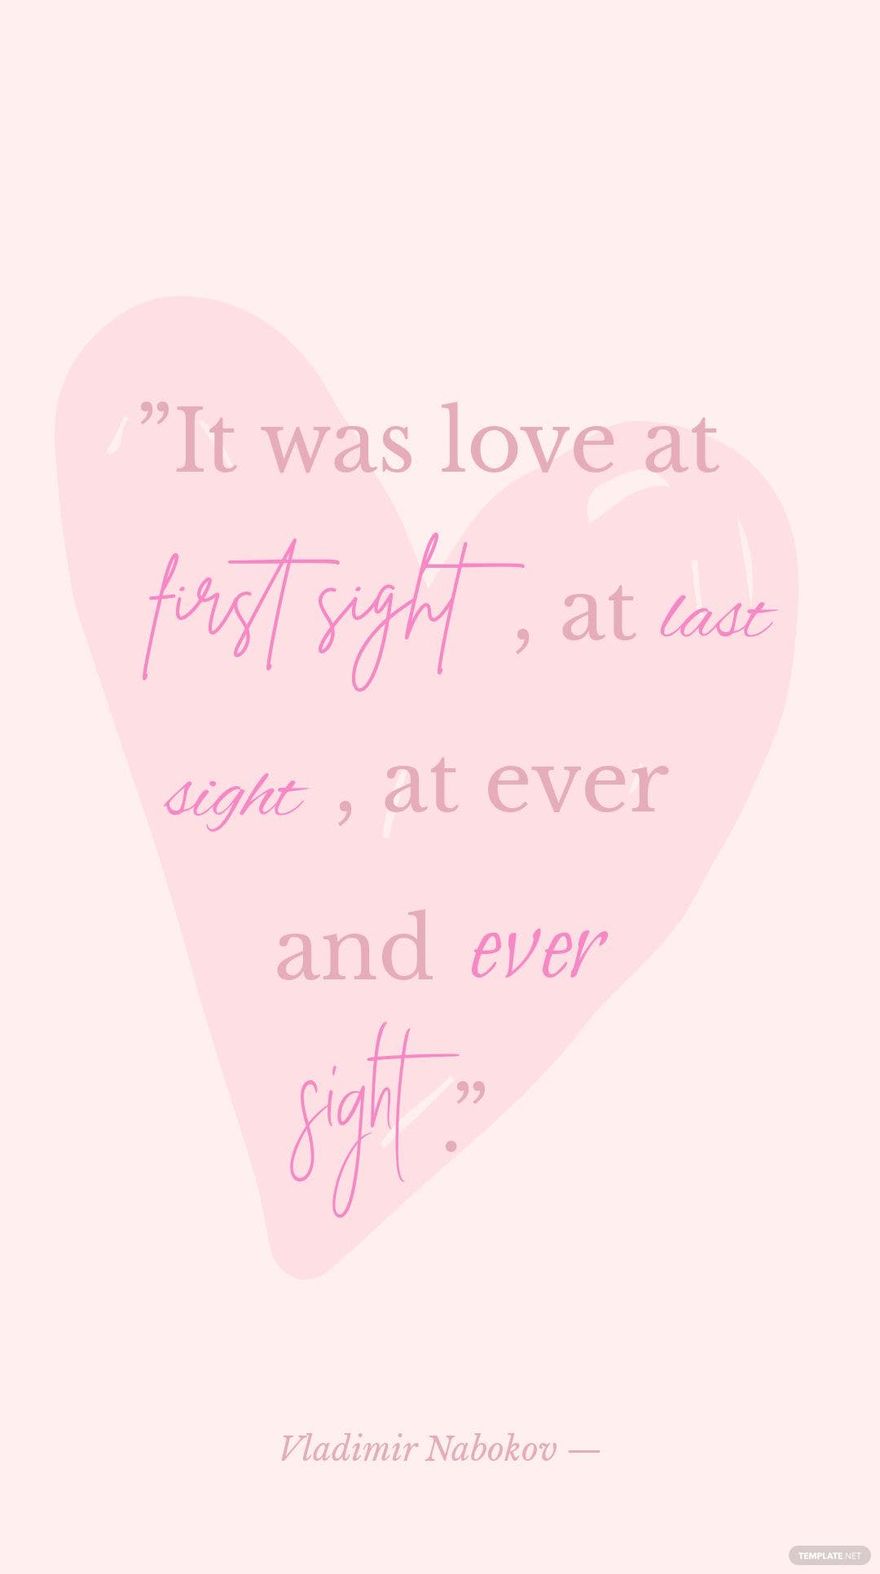 Vladimir Nabokov — ”It was love at first sight, at last sight, at ever and ever sight.”